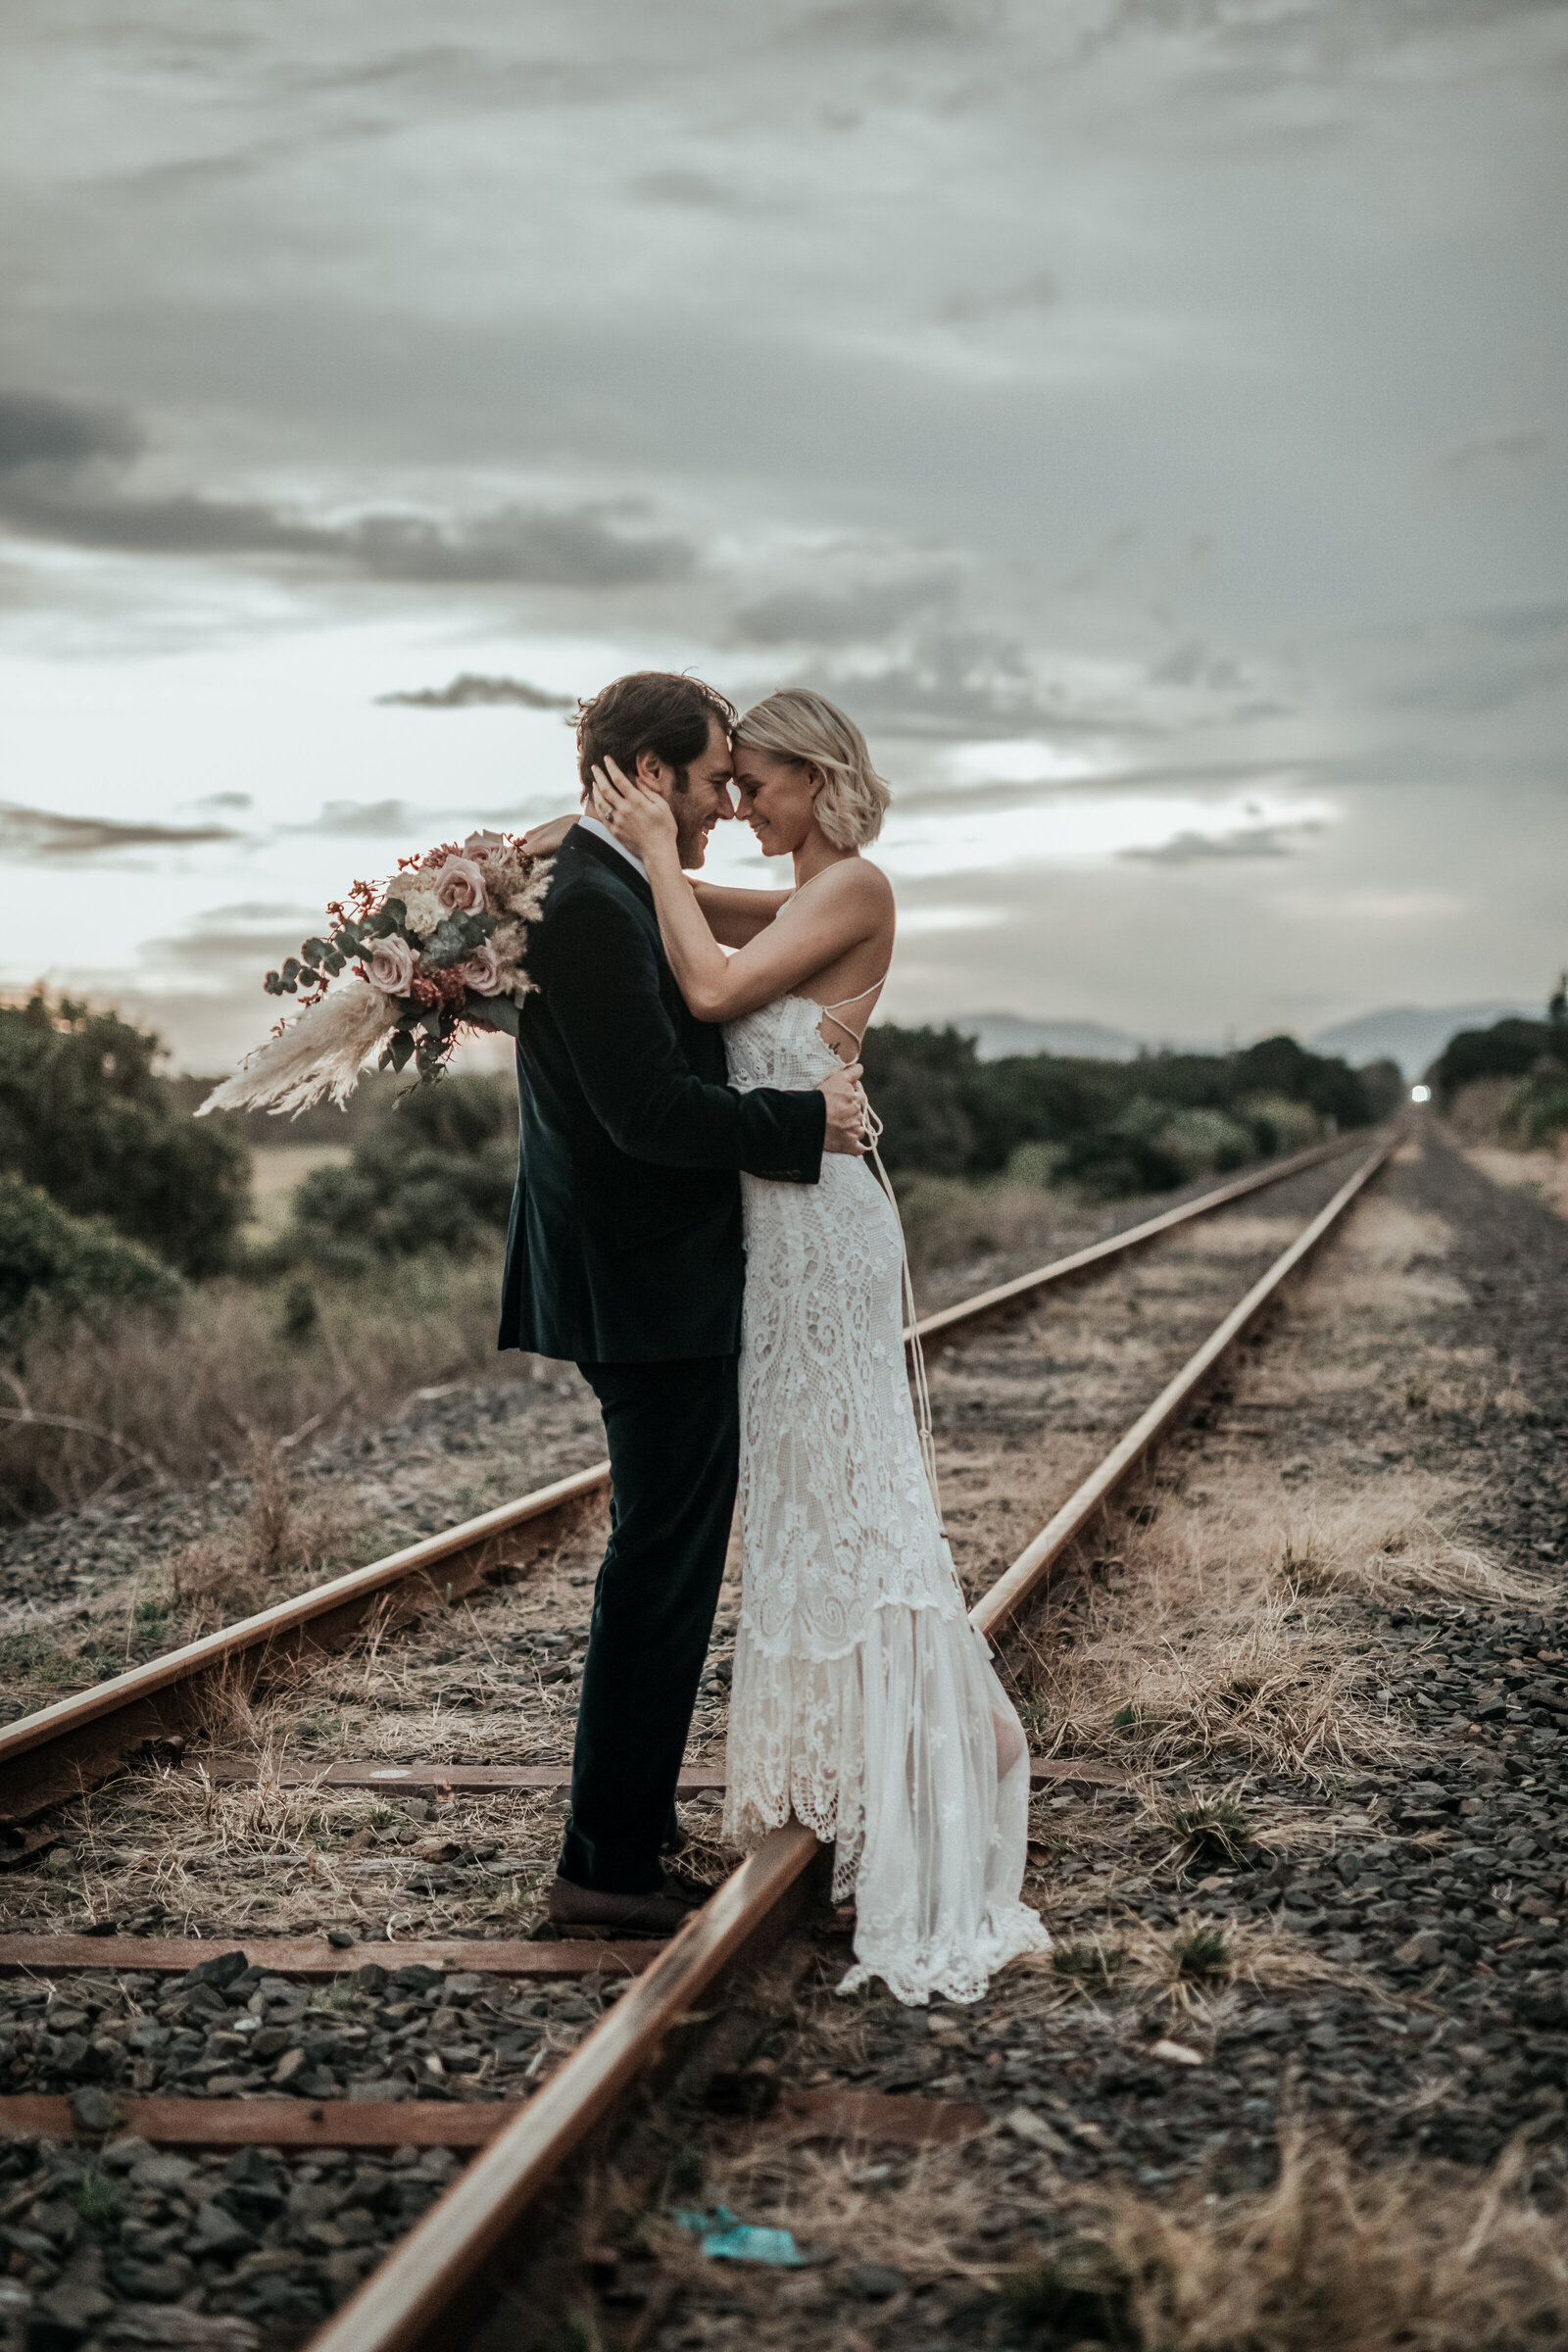 Newlyweds on railway with soft focus background